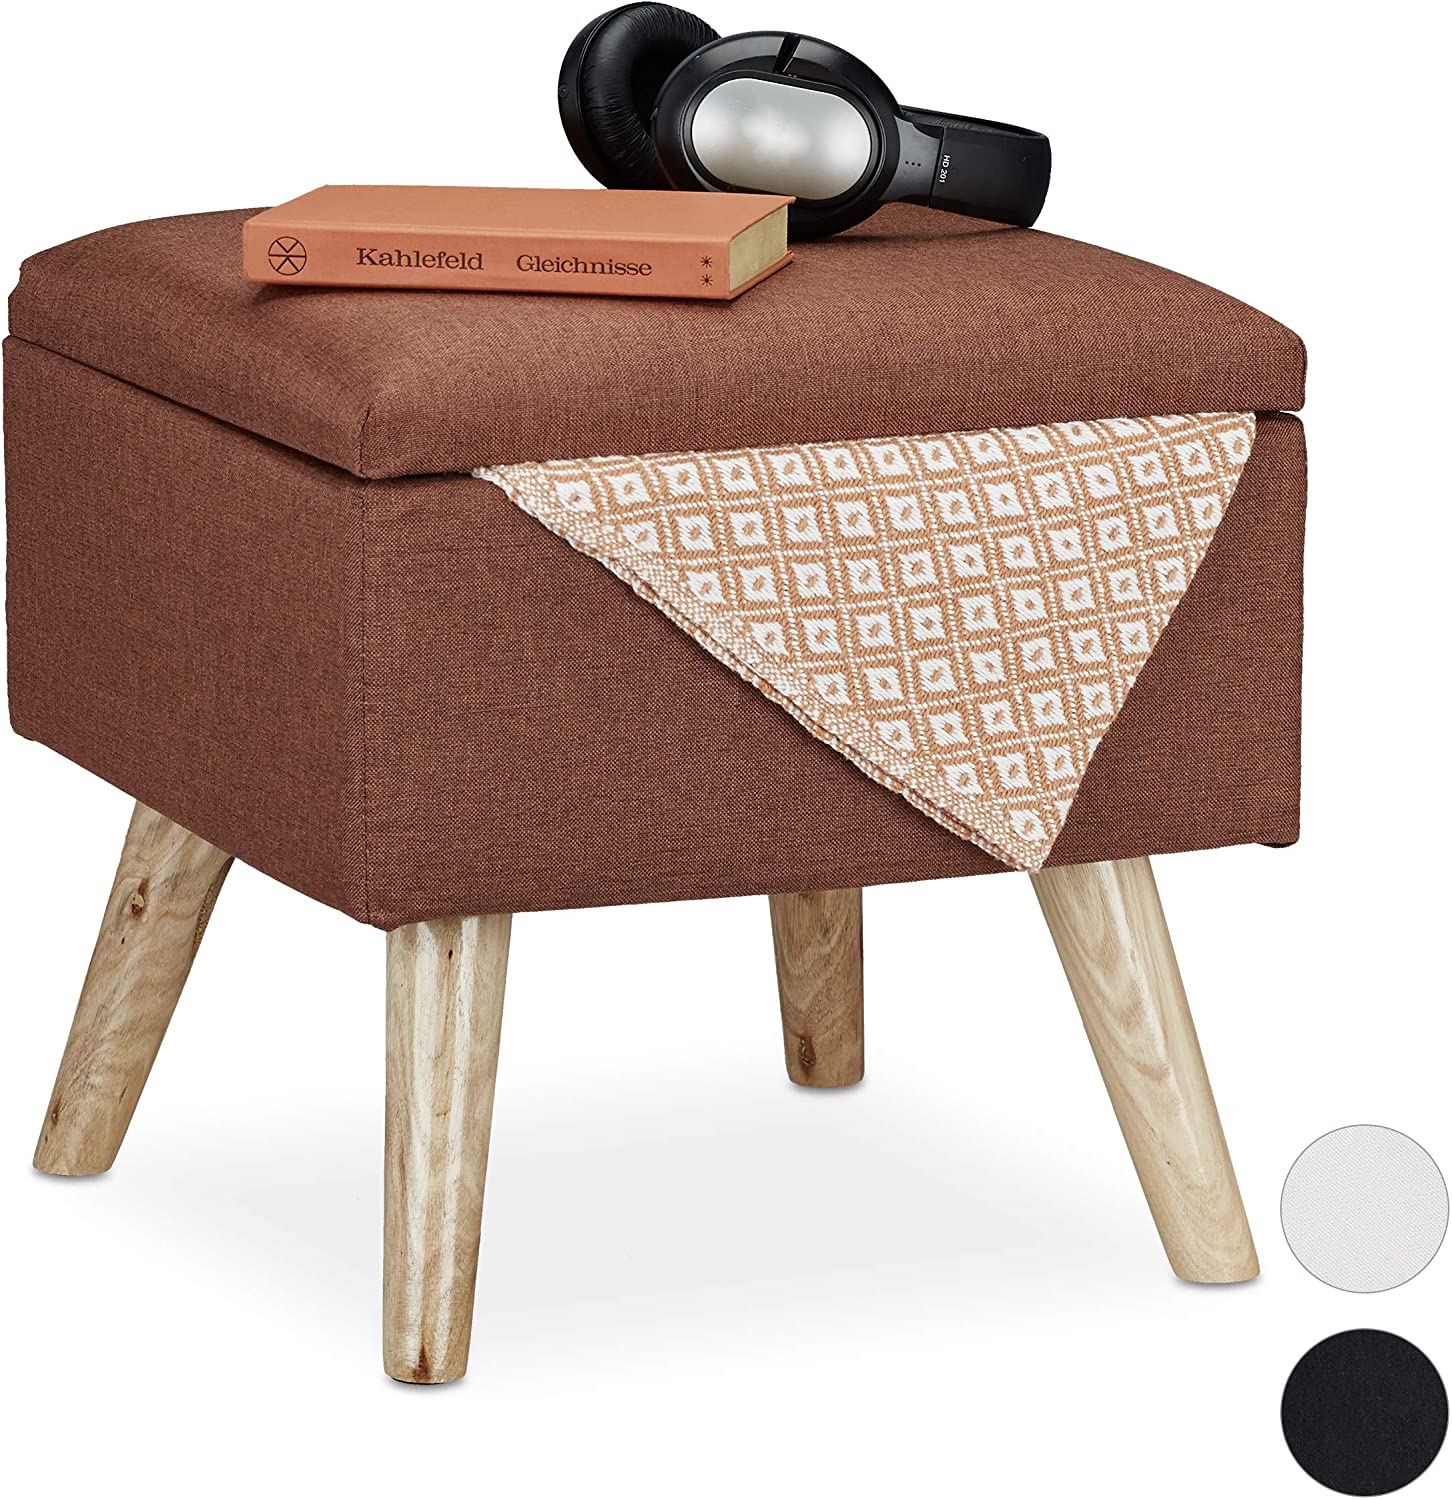 Relaxdays Stool With Storage Space, Faux Linen Cover, Padded, Wooden Legs, 